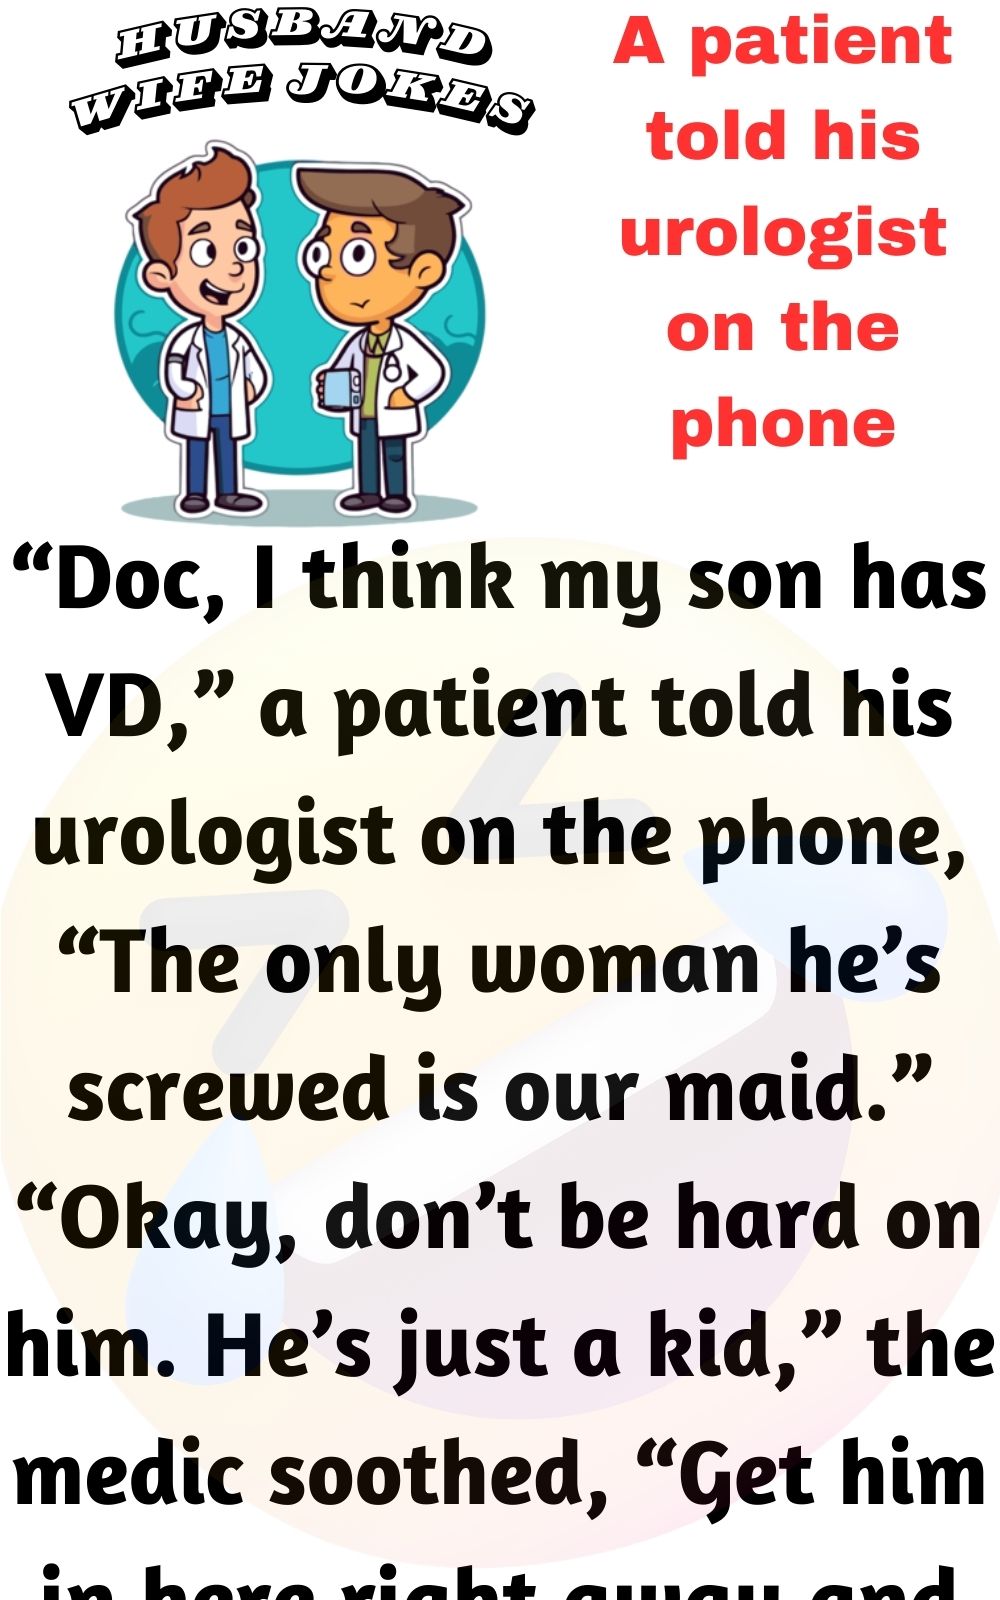 A patient told his urologist on the phone